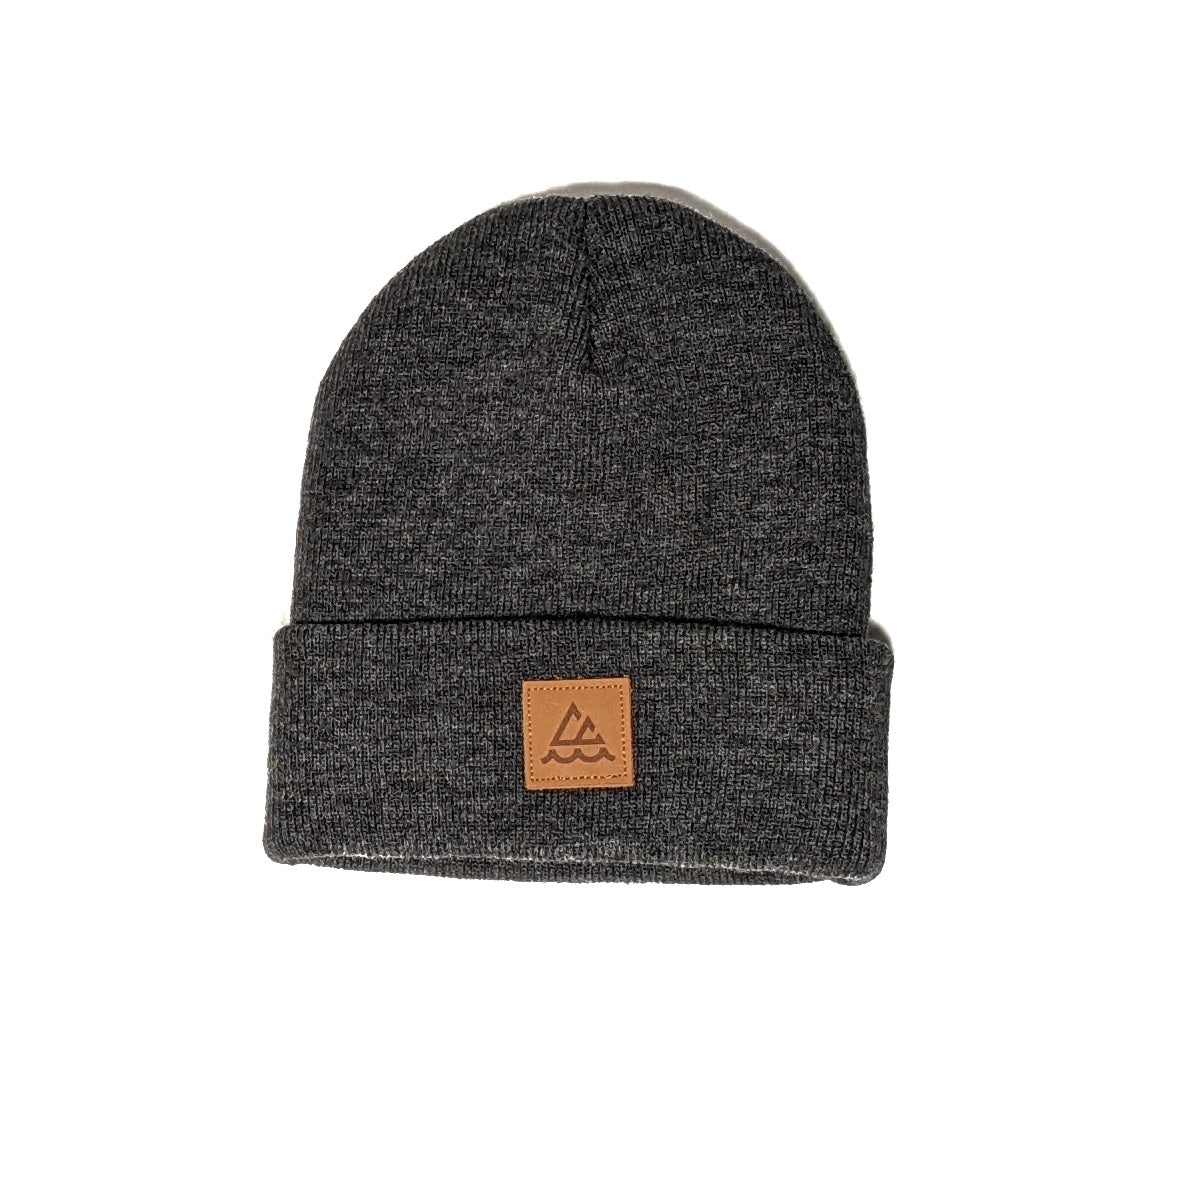 YOUTH INLET PATCH TOQUE